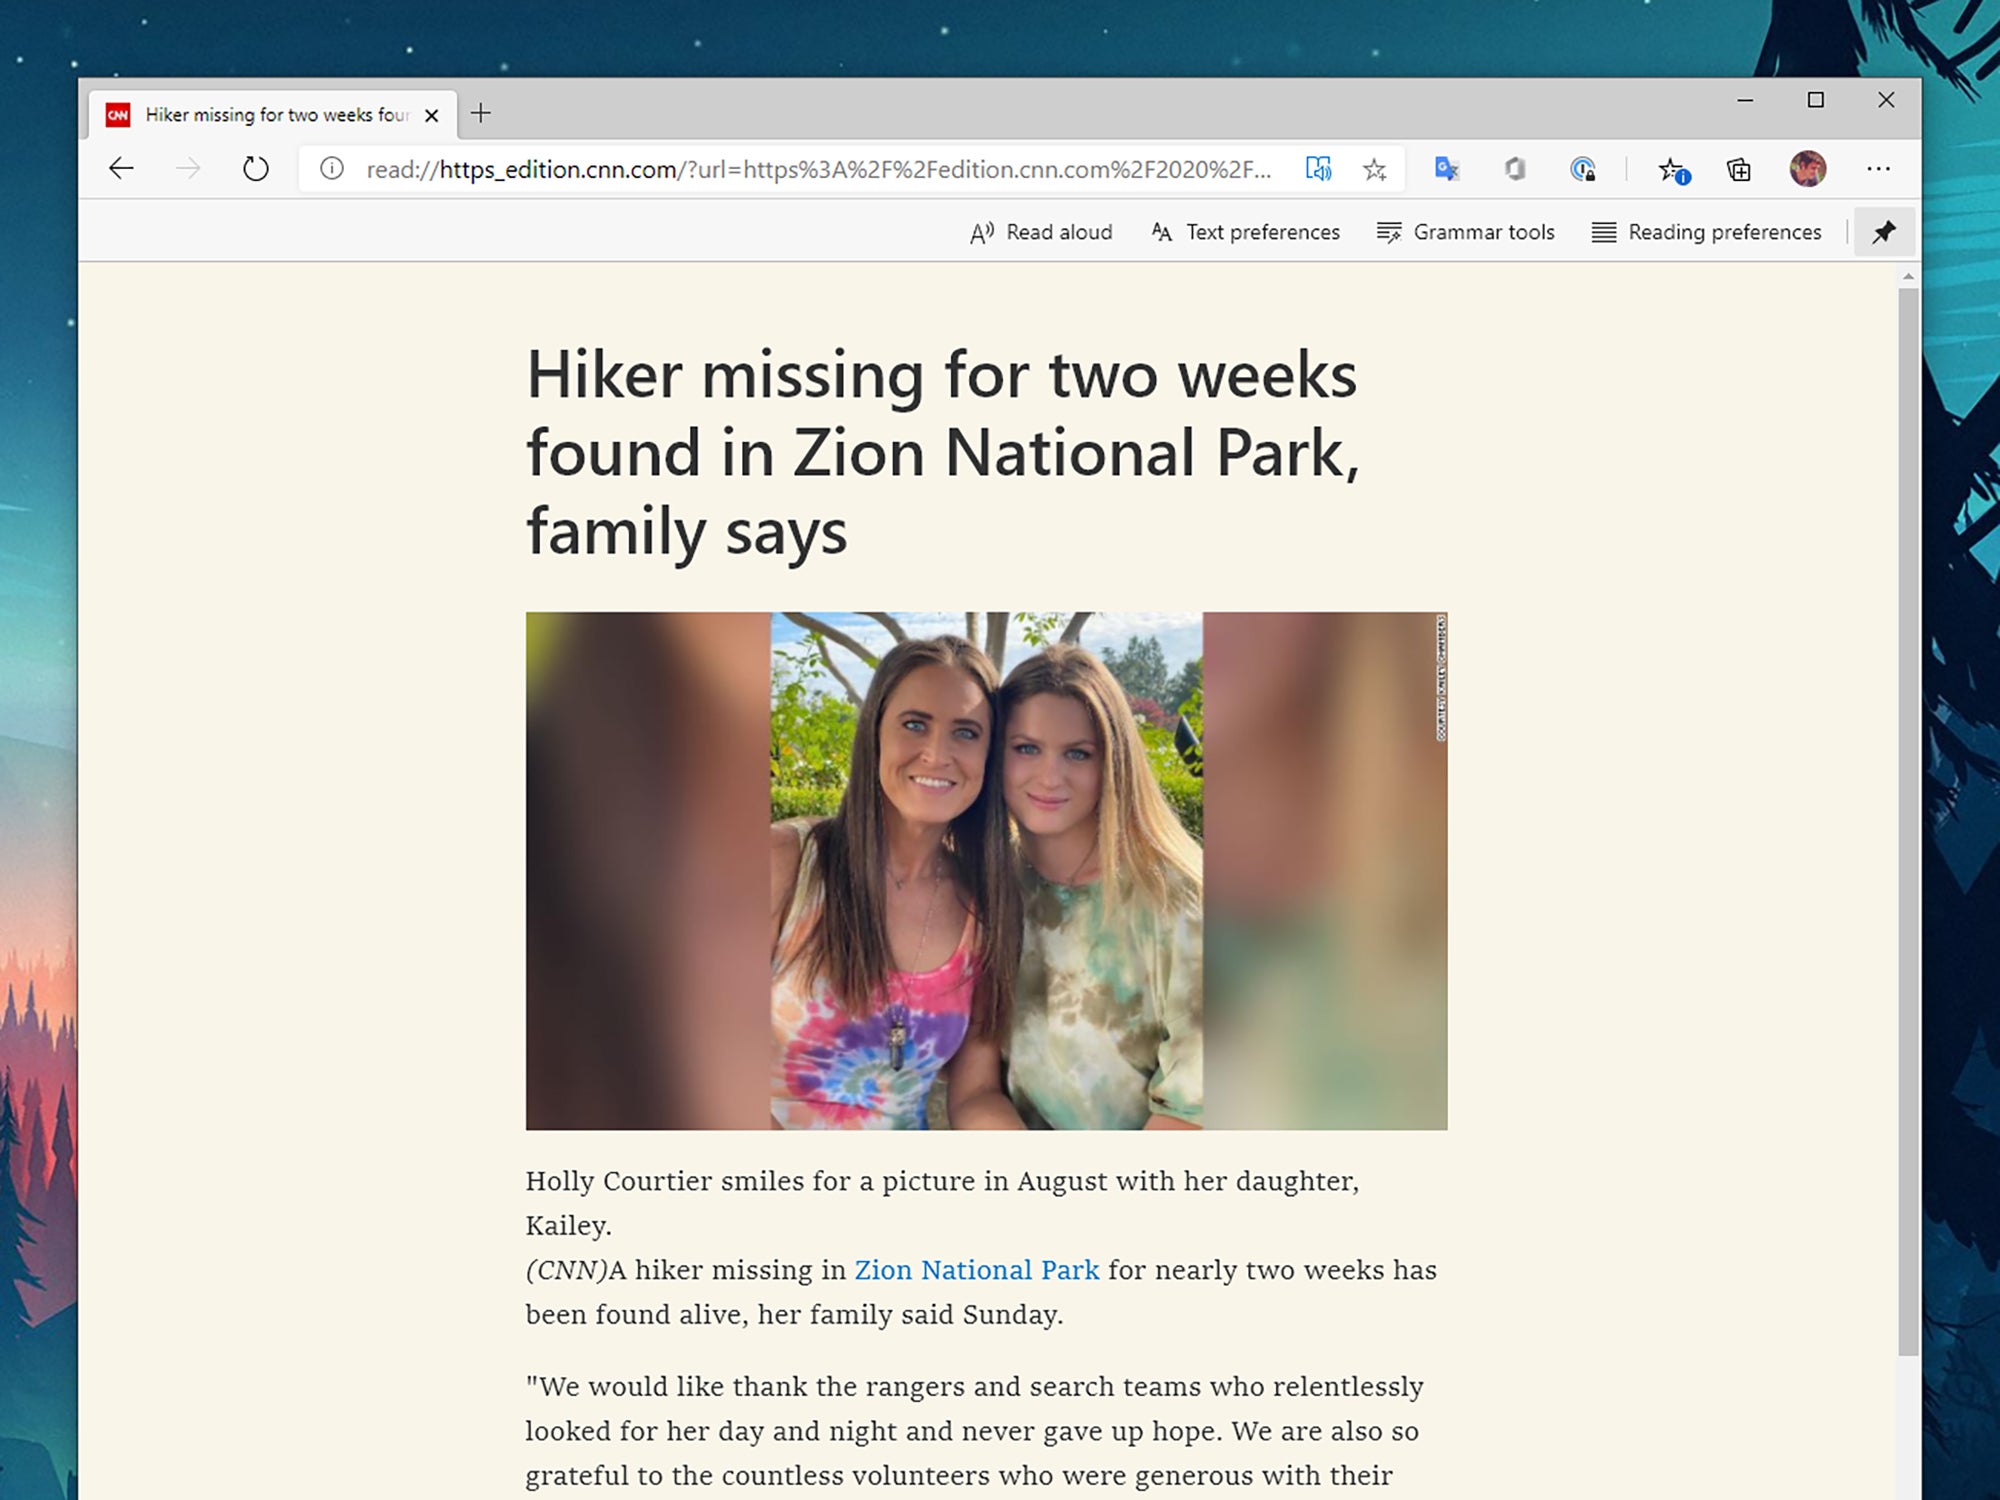 Microsoft Edge's Immersive Reader feature for web pages.